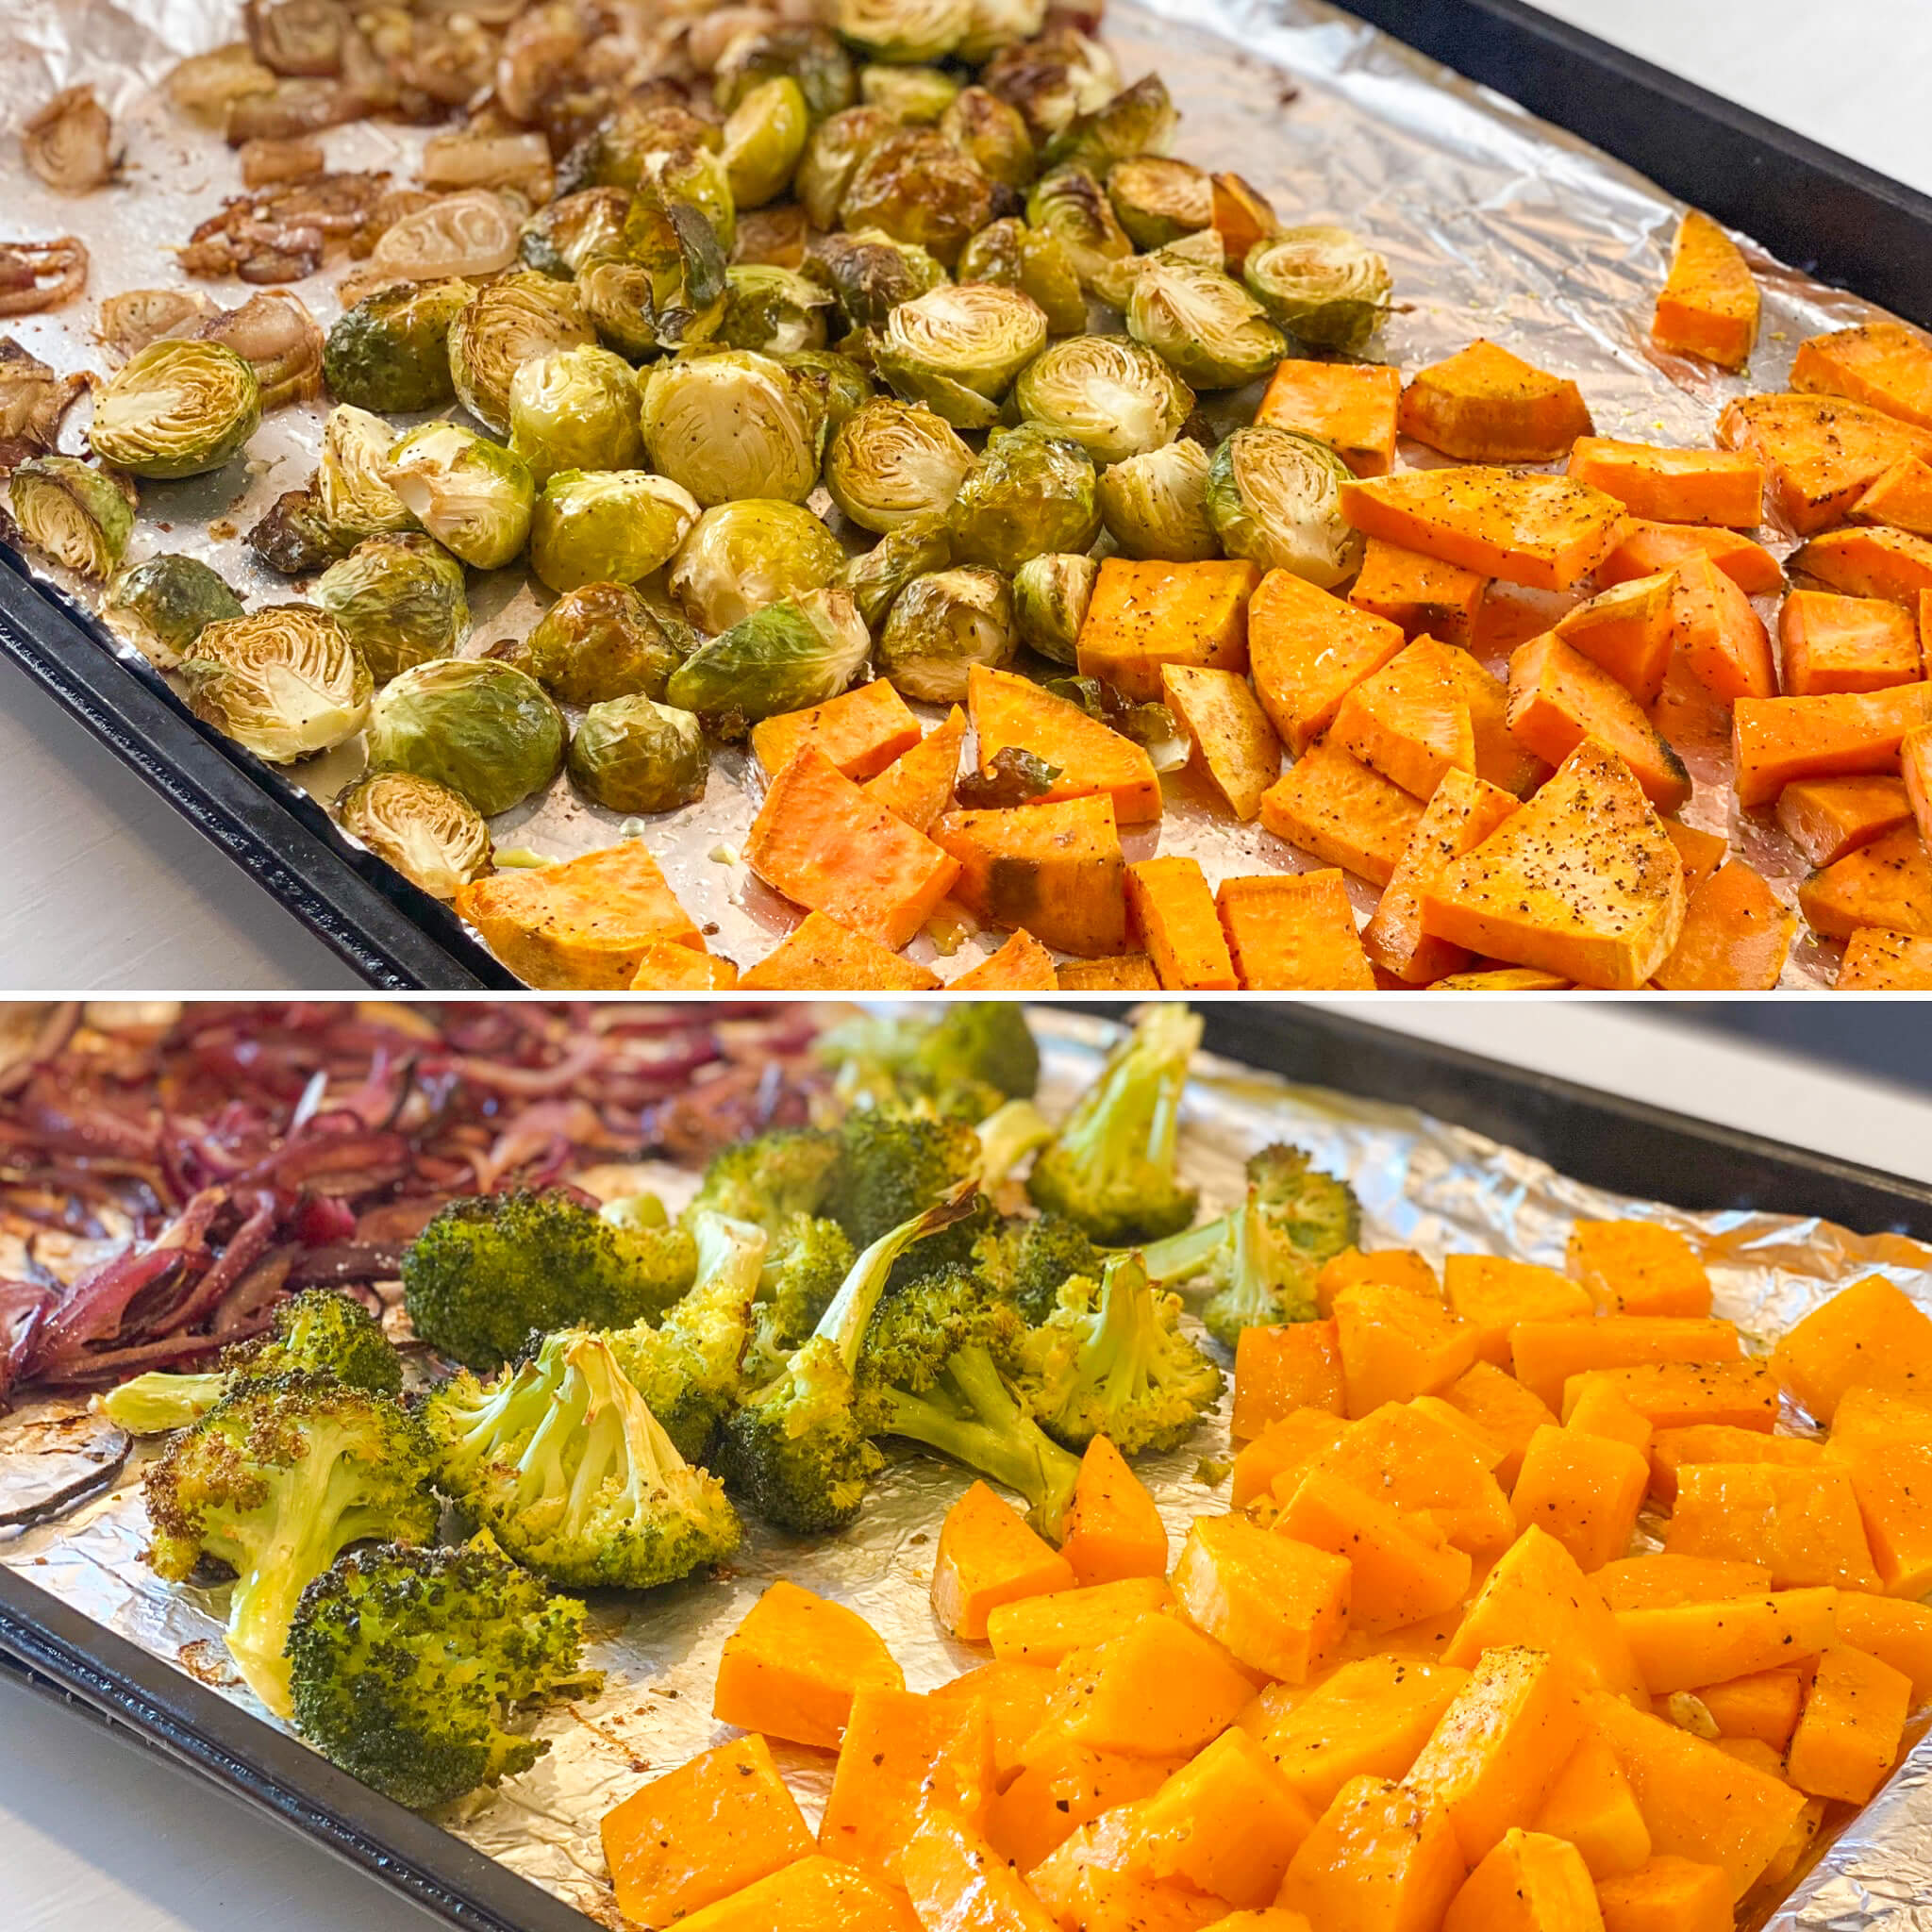 Different fall/winter vegetable options for the salad
Picture on the top has shallots, brussel sprouts and sweet potatoes roasted and the picture on the bottom has red onion, brocoli and butternut squash